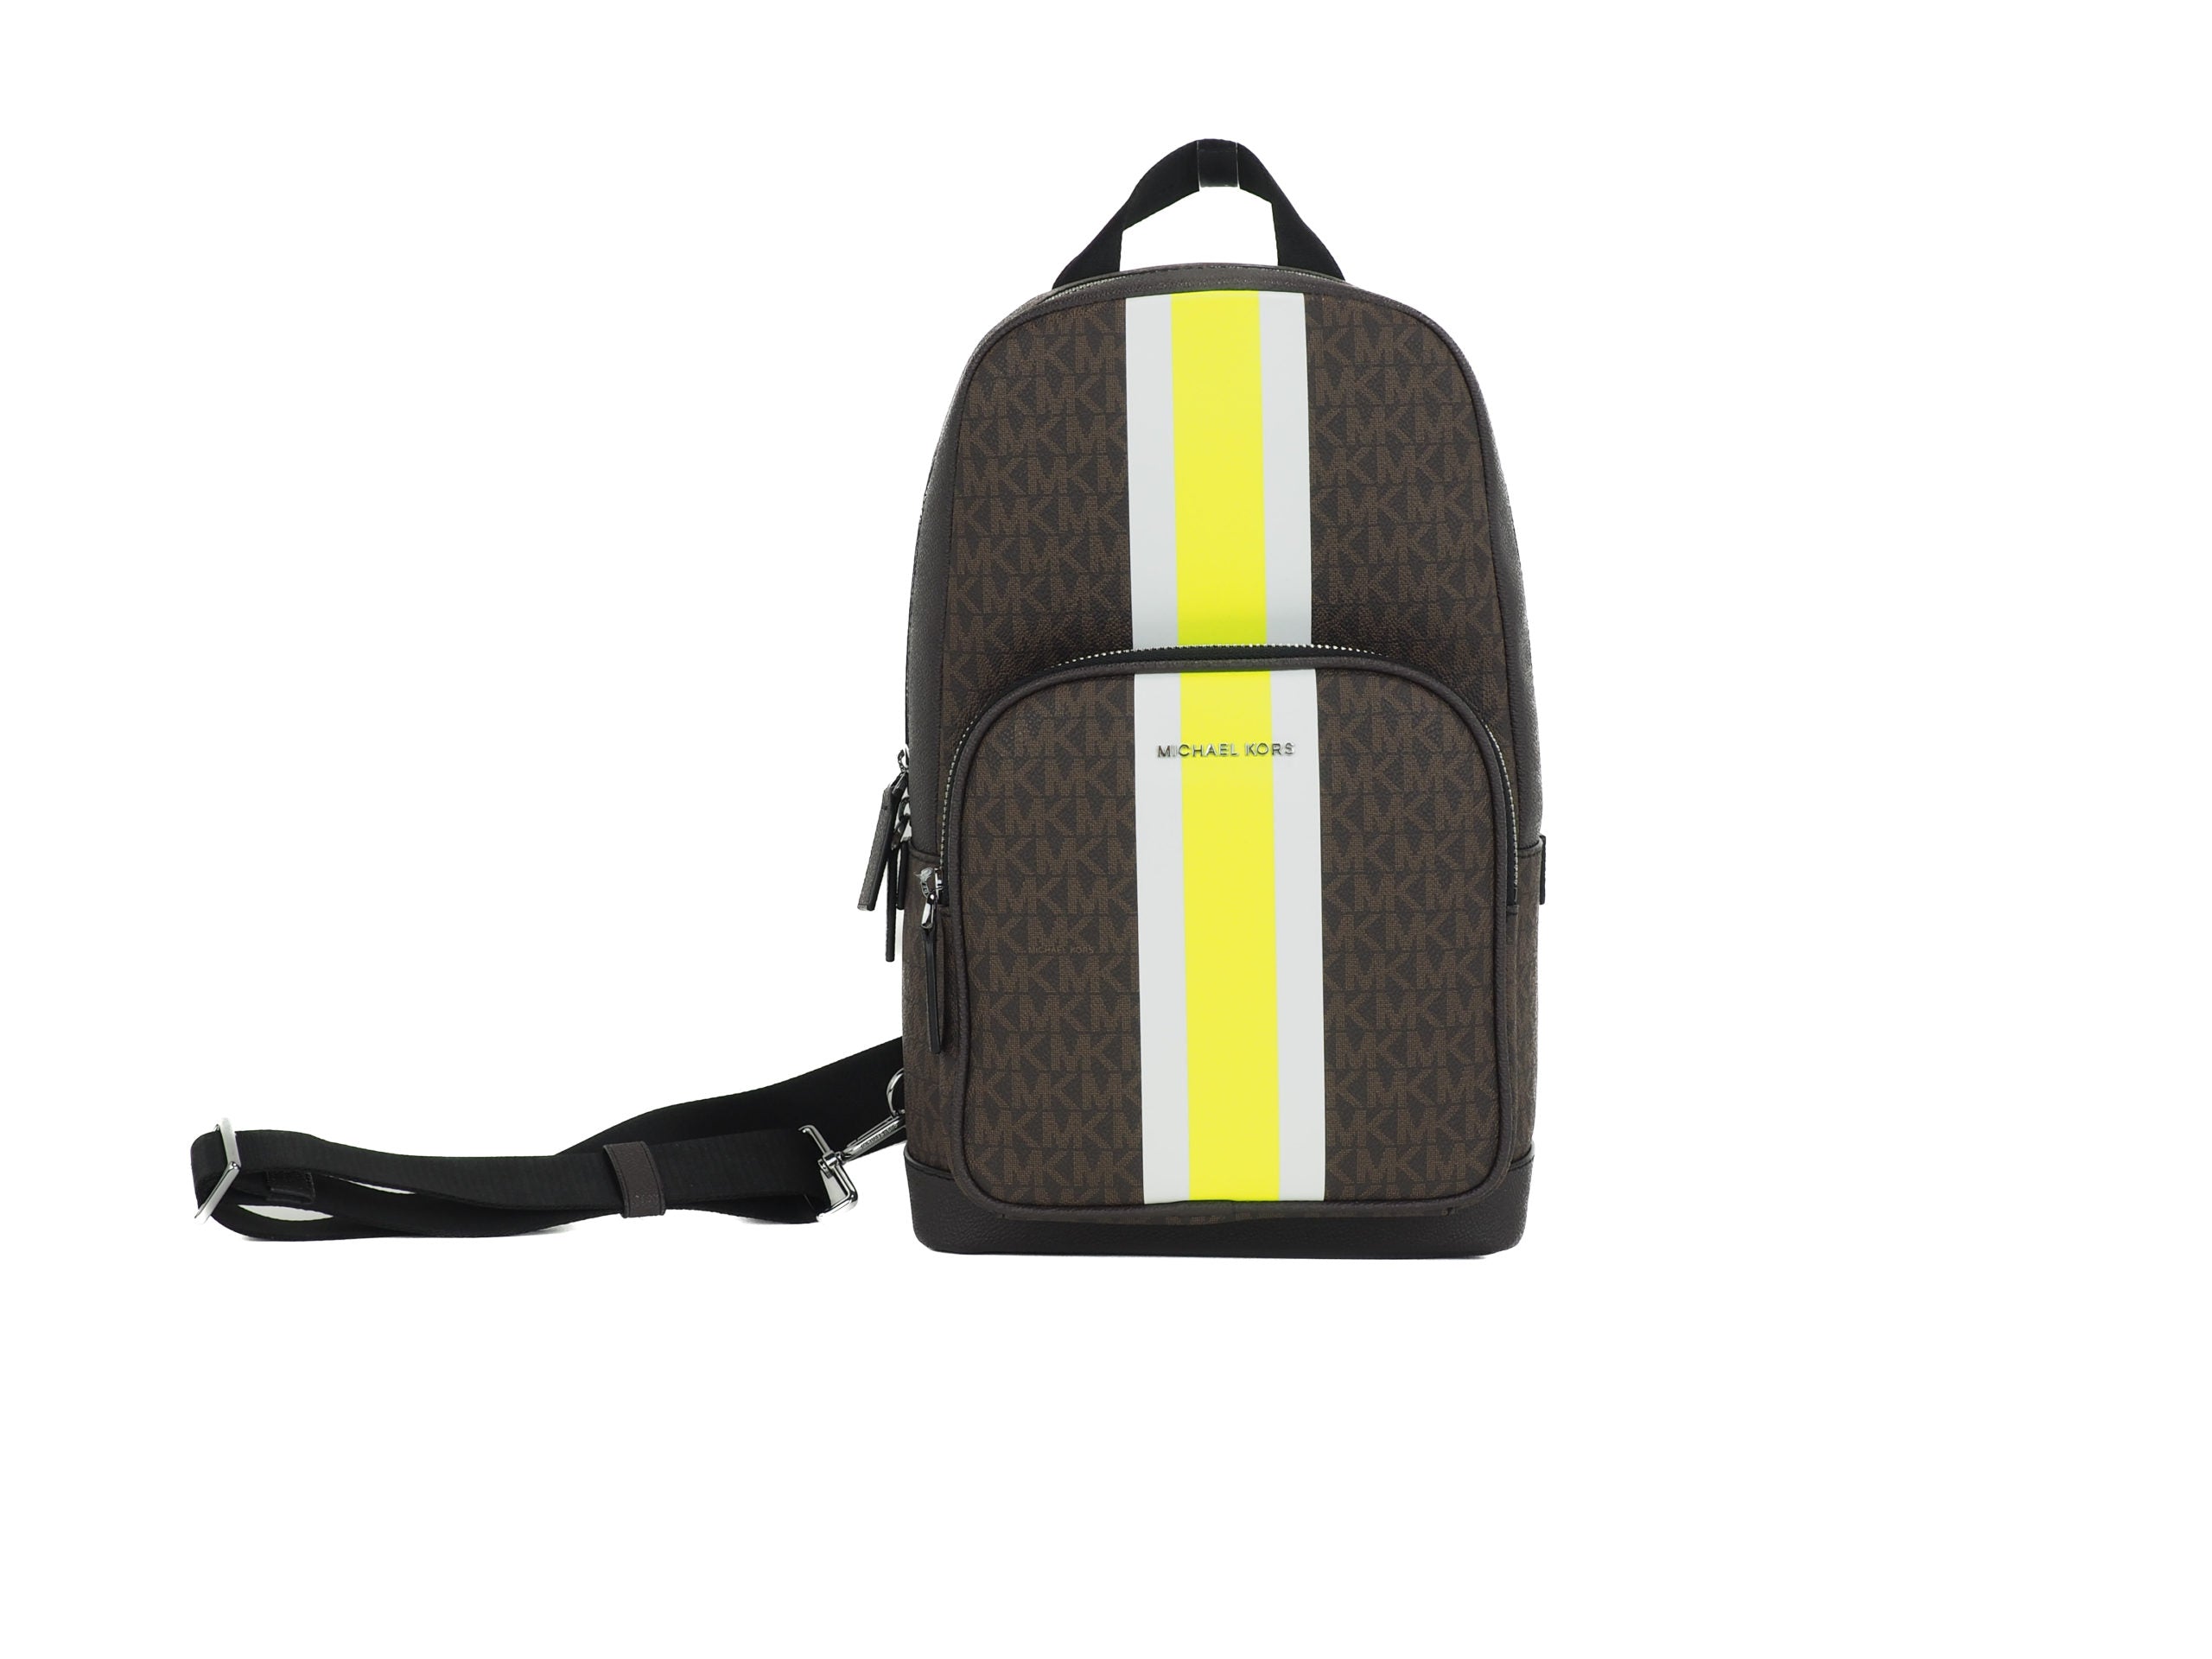 Michael Kors MK Cooper Graphic Logo Backpack- Flame/Black Black - $159 (70%  Off Retail) New With Tags - From Kash